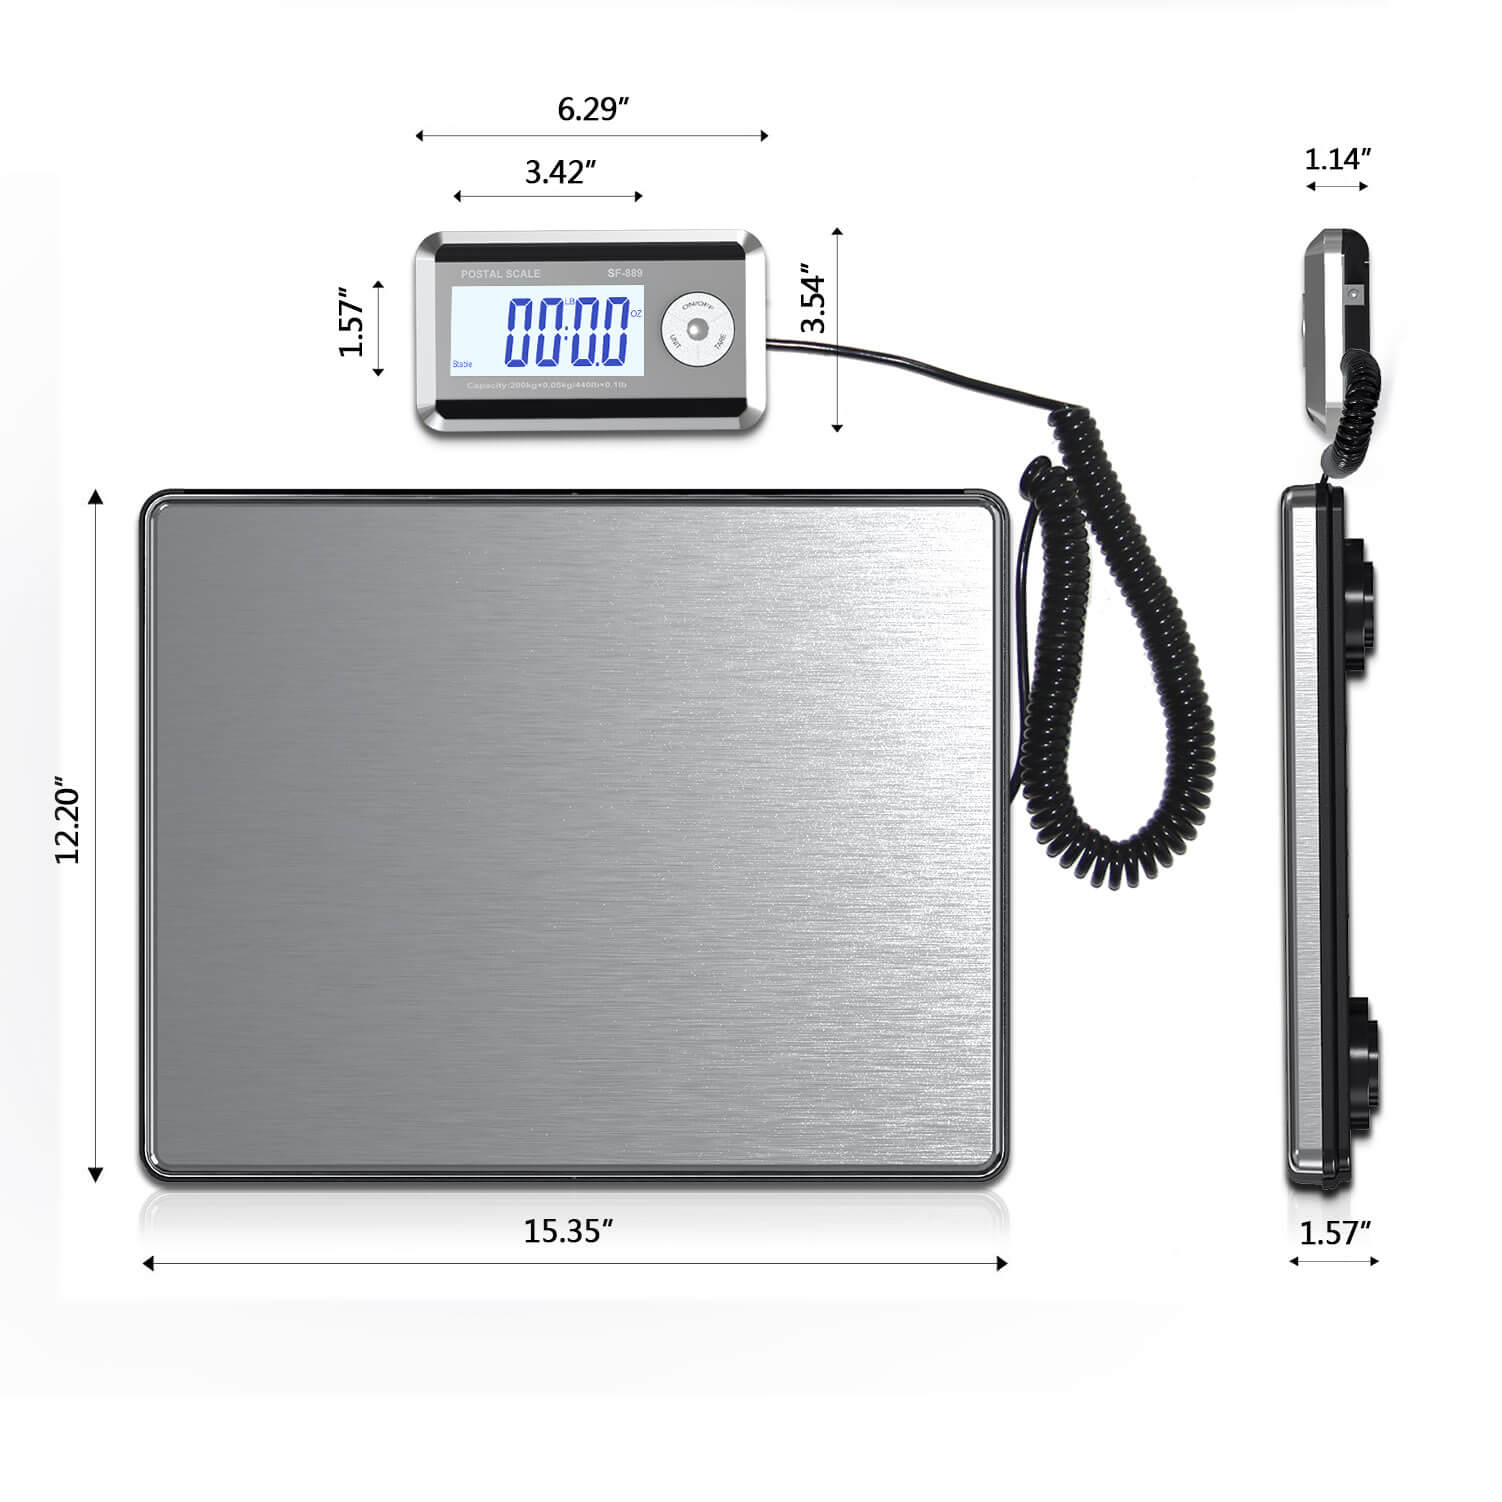 Suofei SF-889 Heavy Duty Parcel Electronic Postage Digital Postal Shipping Weight Postal Scale